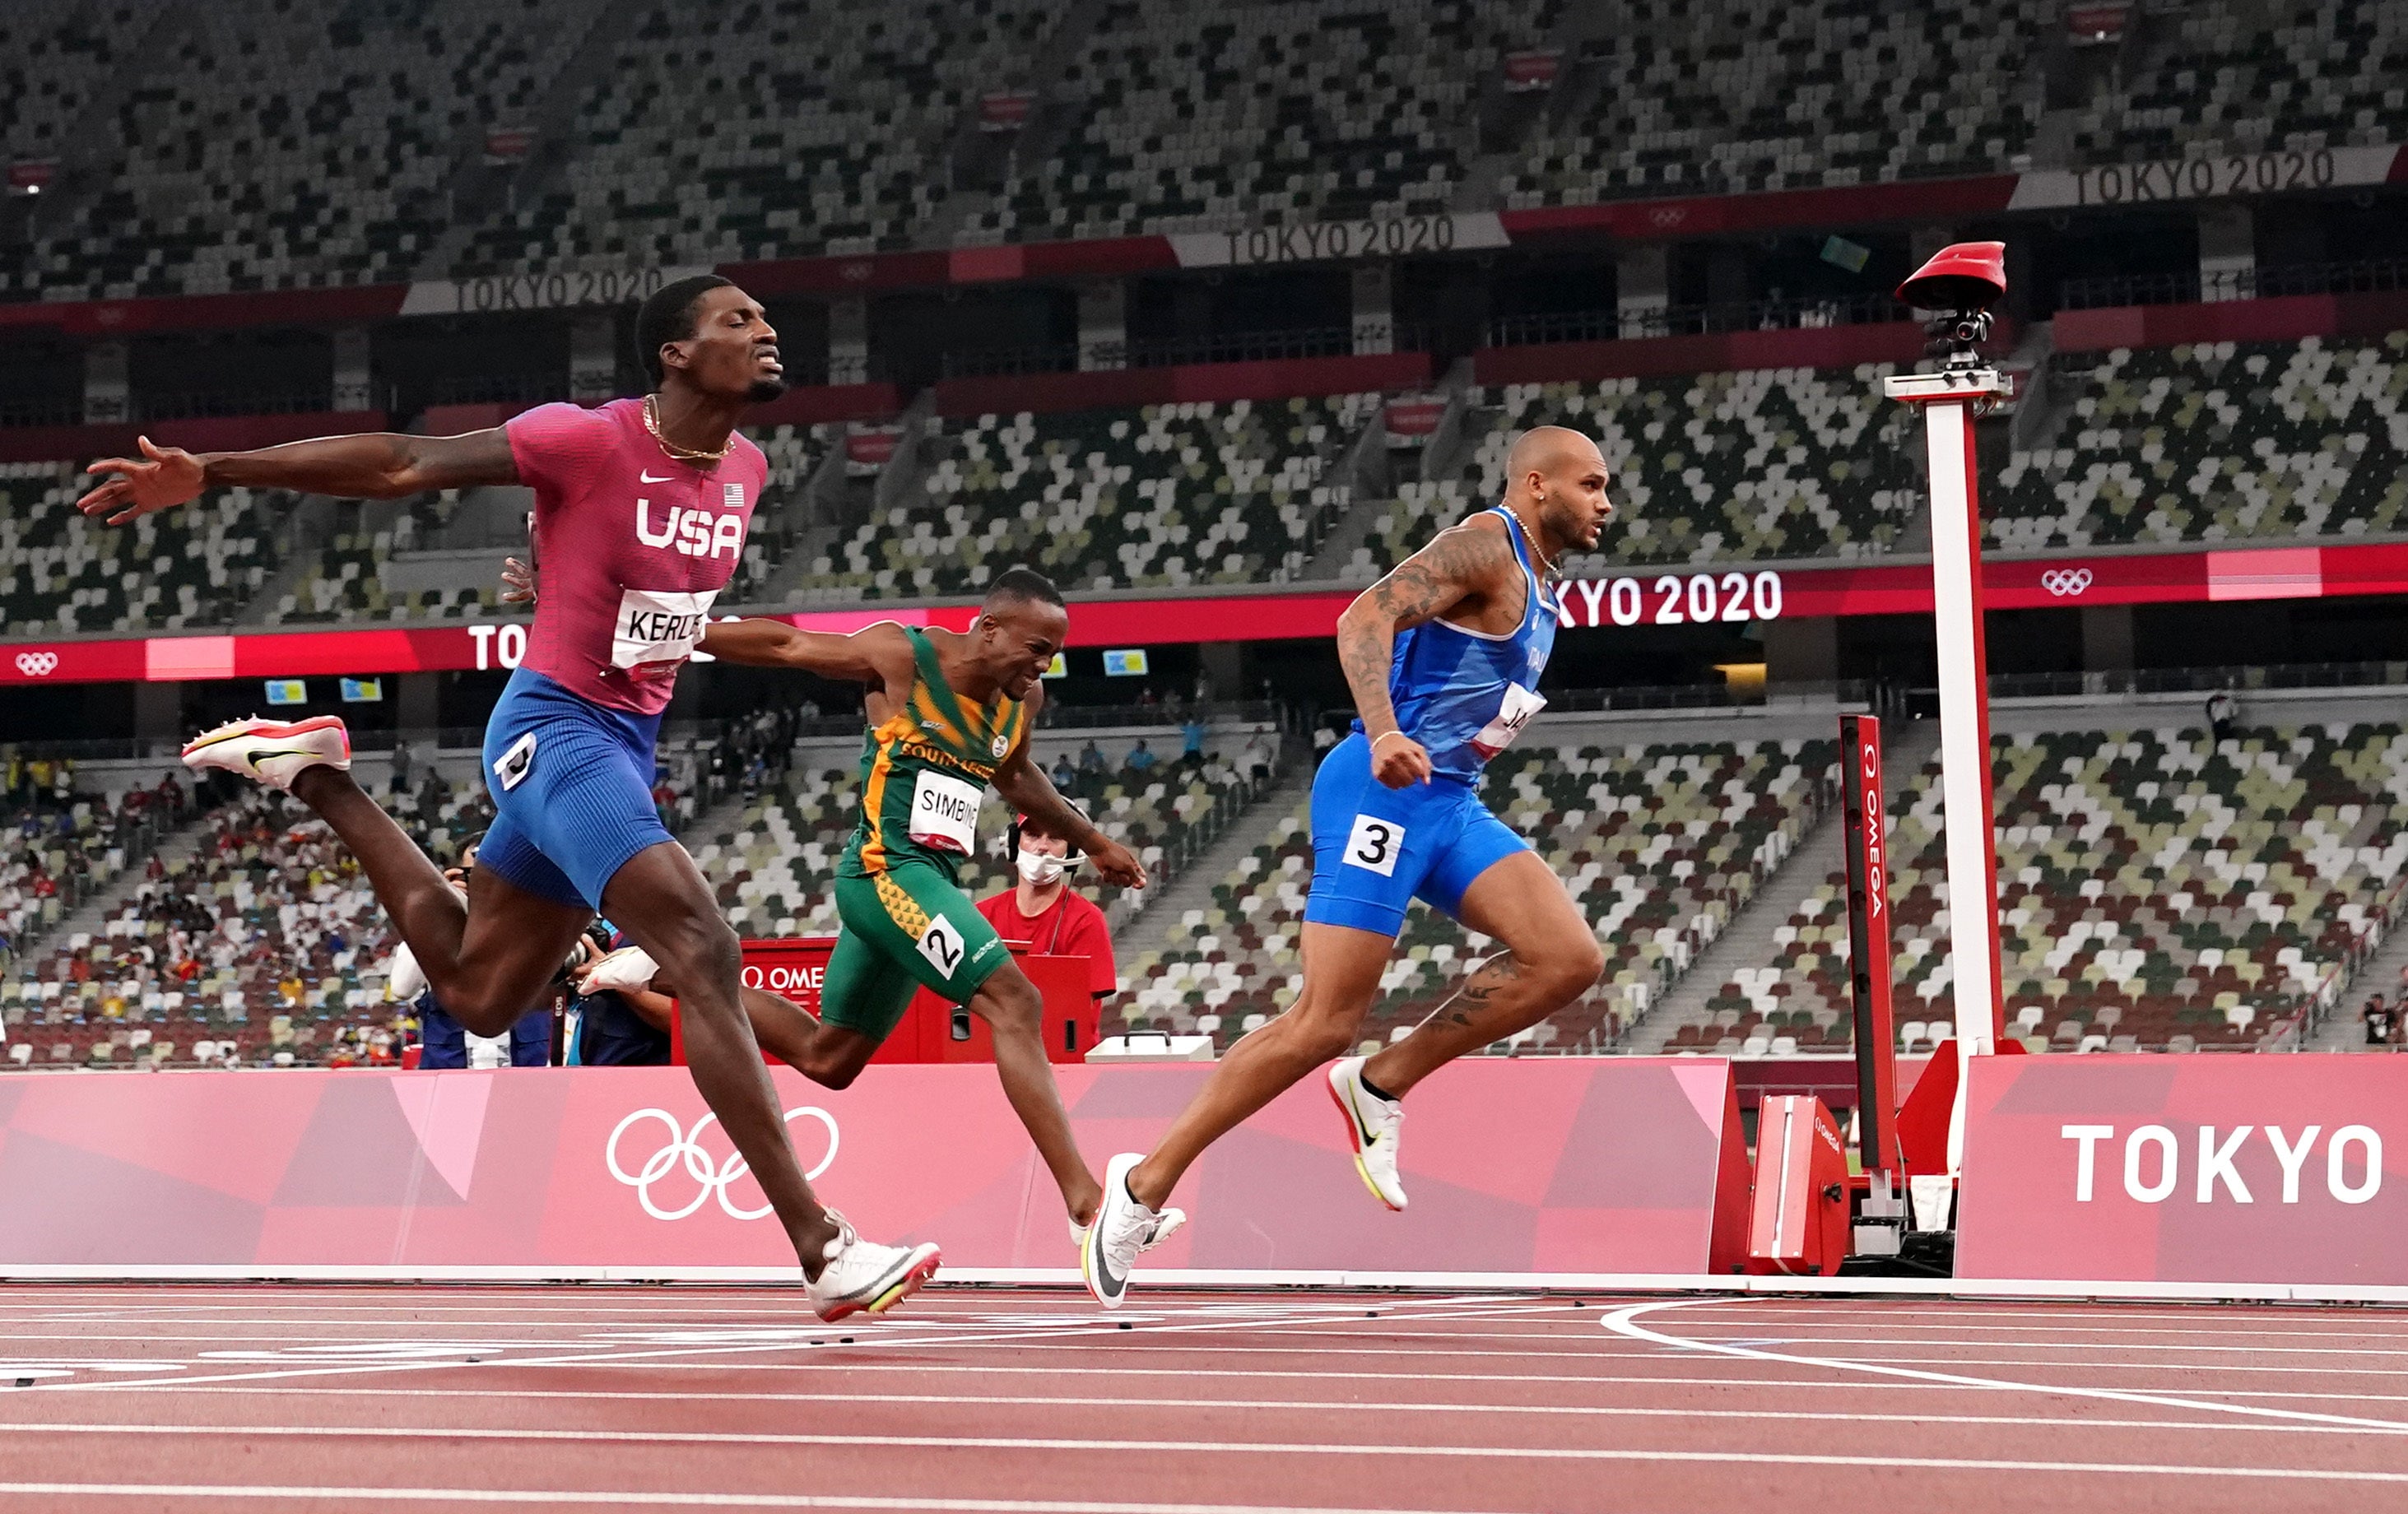 Italy’s Lamont Marcell Jacobs wins the 100m in Tokyo